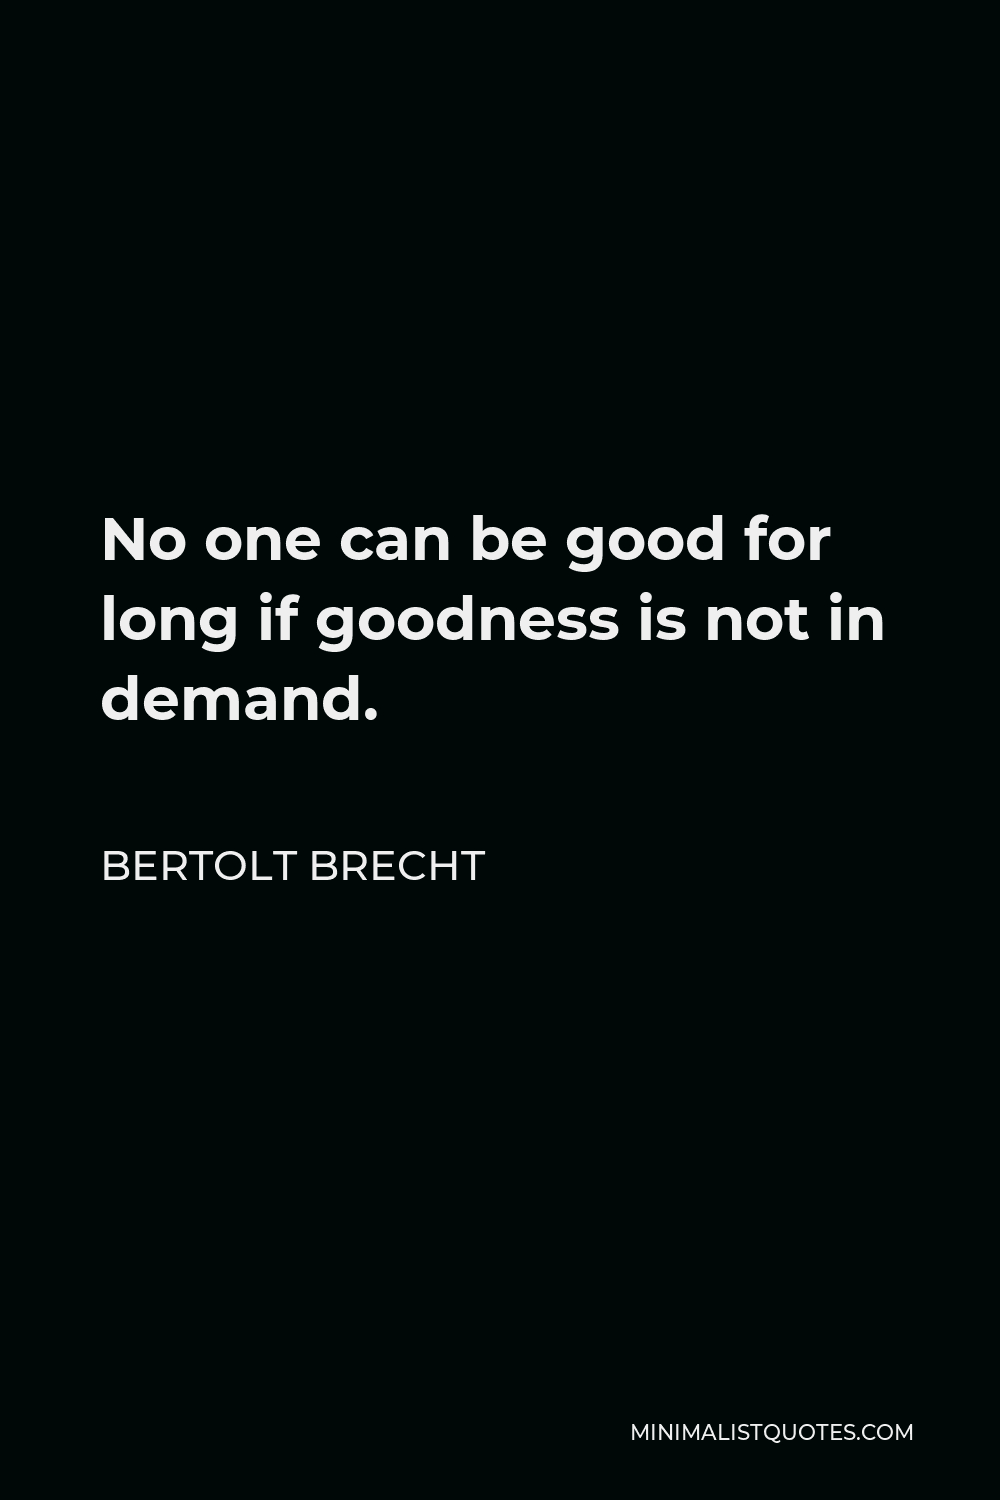 Bertolt Brecht Quote - No one can be good for long if goodness is not in demand.